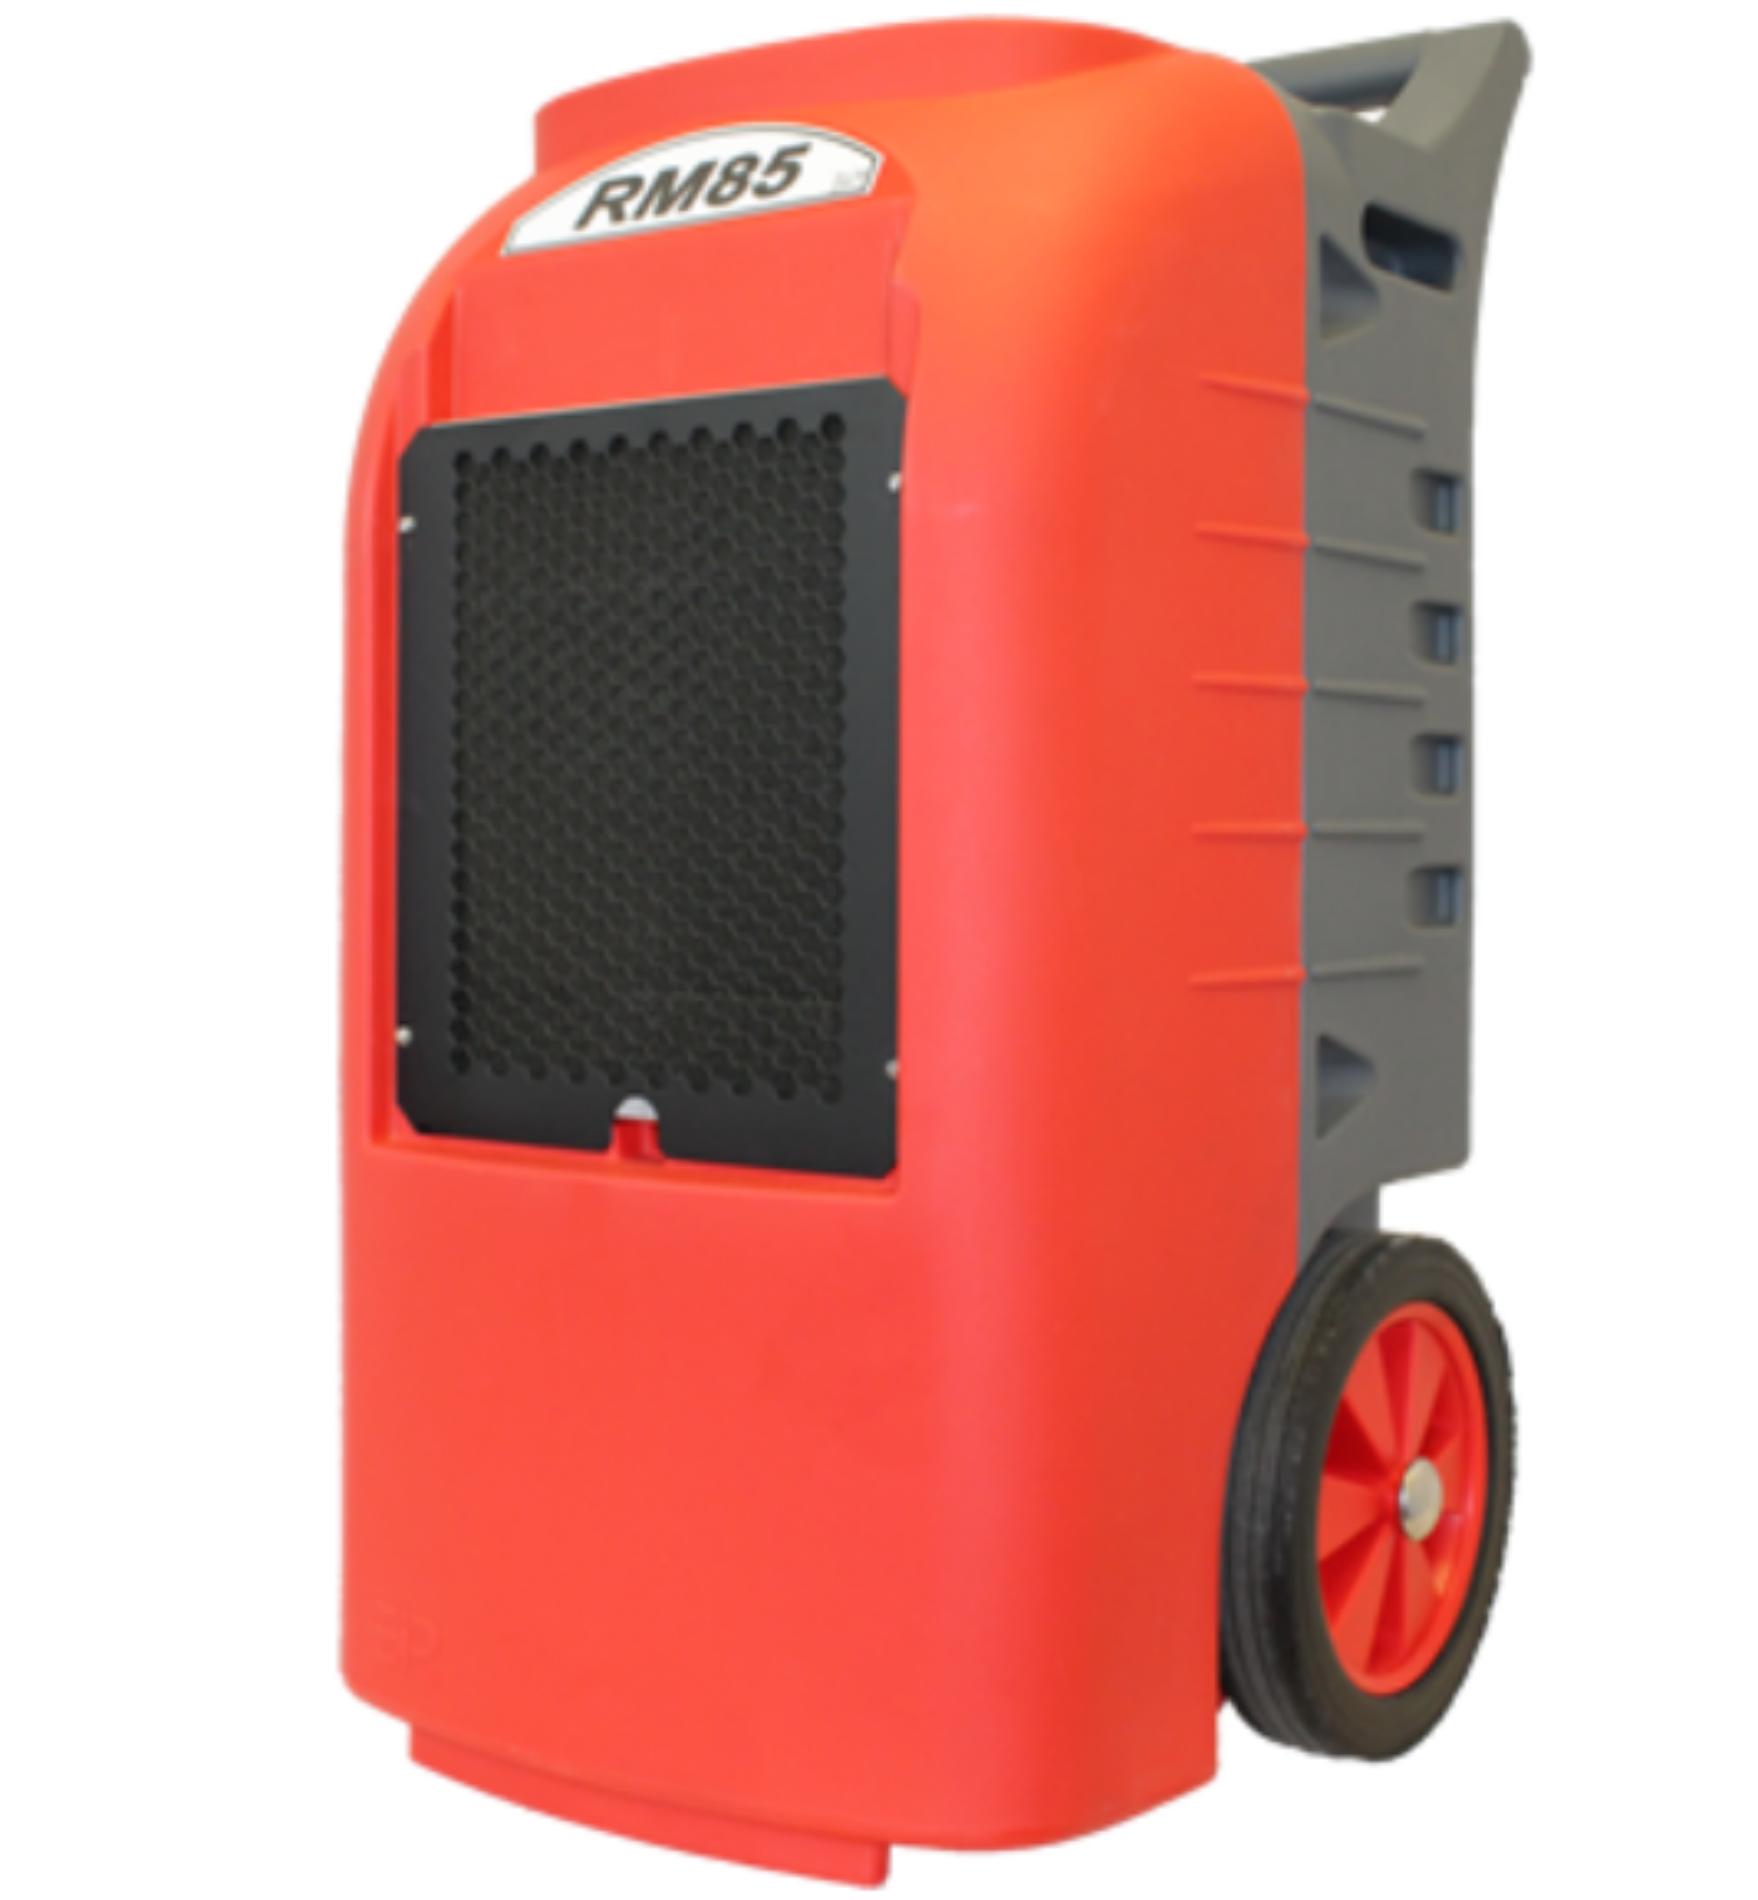 Picture of Ebac RM85H Dv 85L Dual Voltage Industrial Dehumidifier with Humidistat